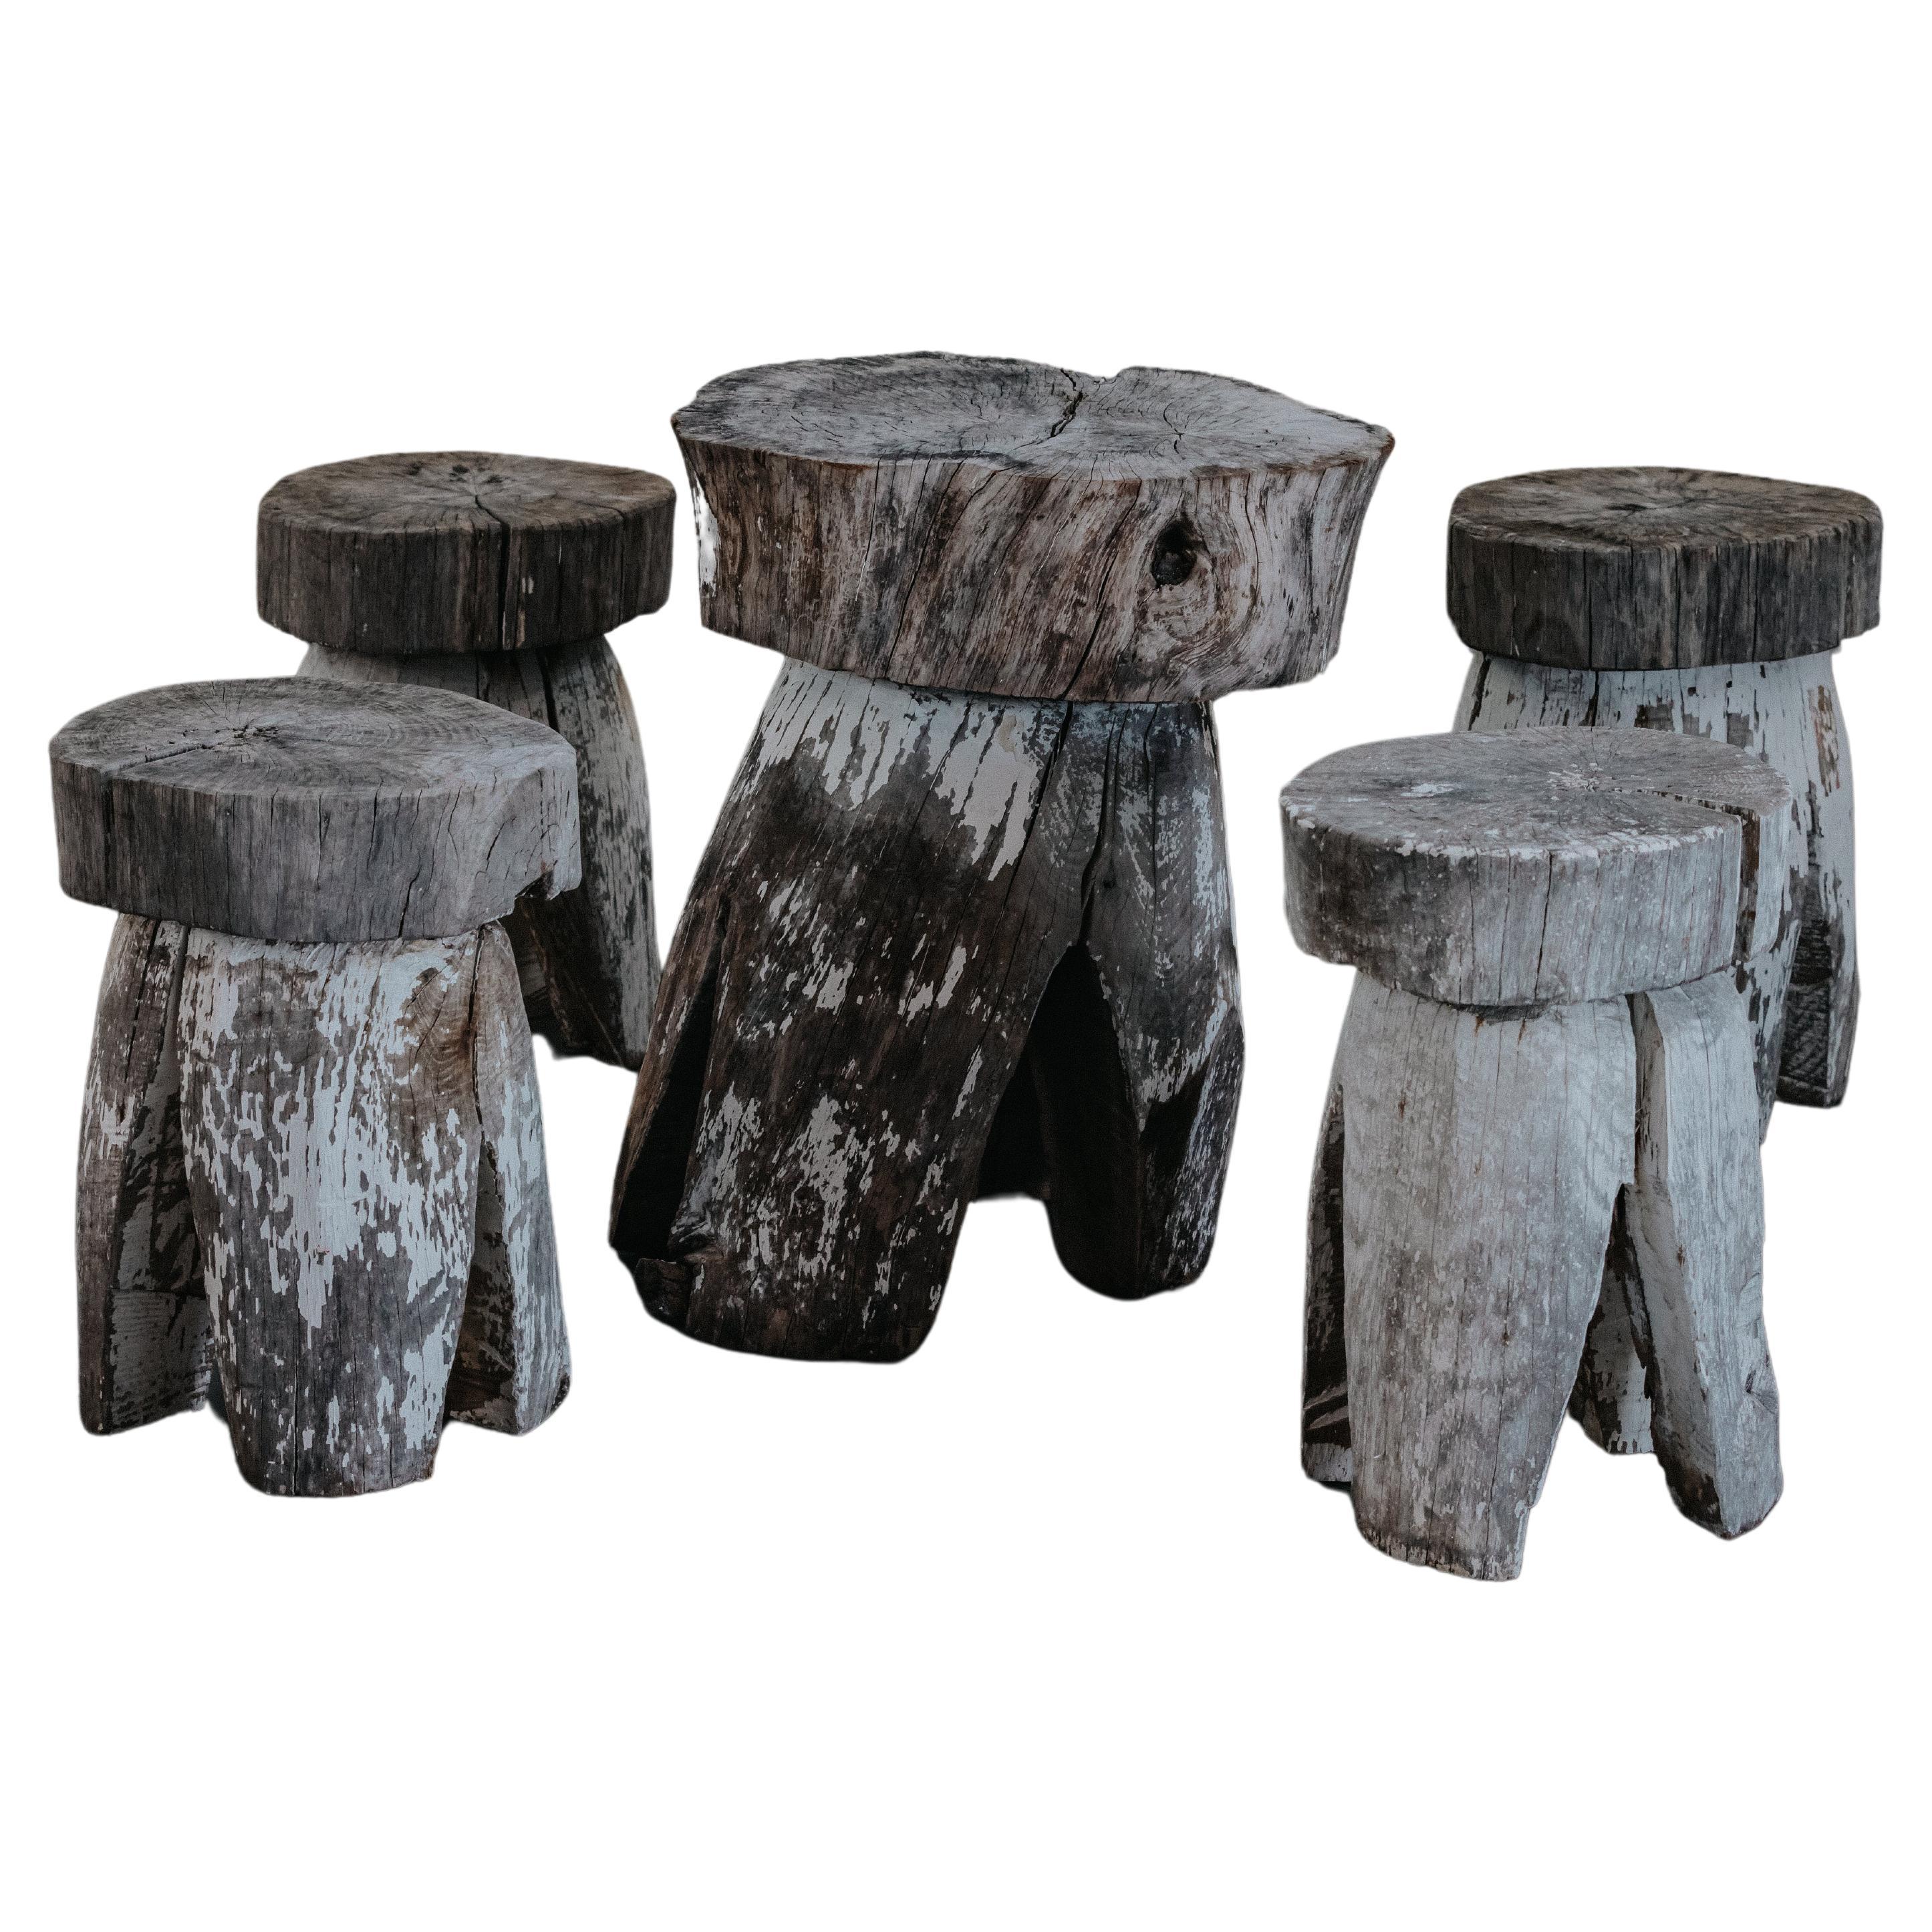 Unusual Primitive Table Set From The French Alps, Circa 1950